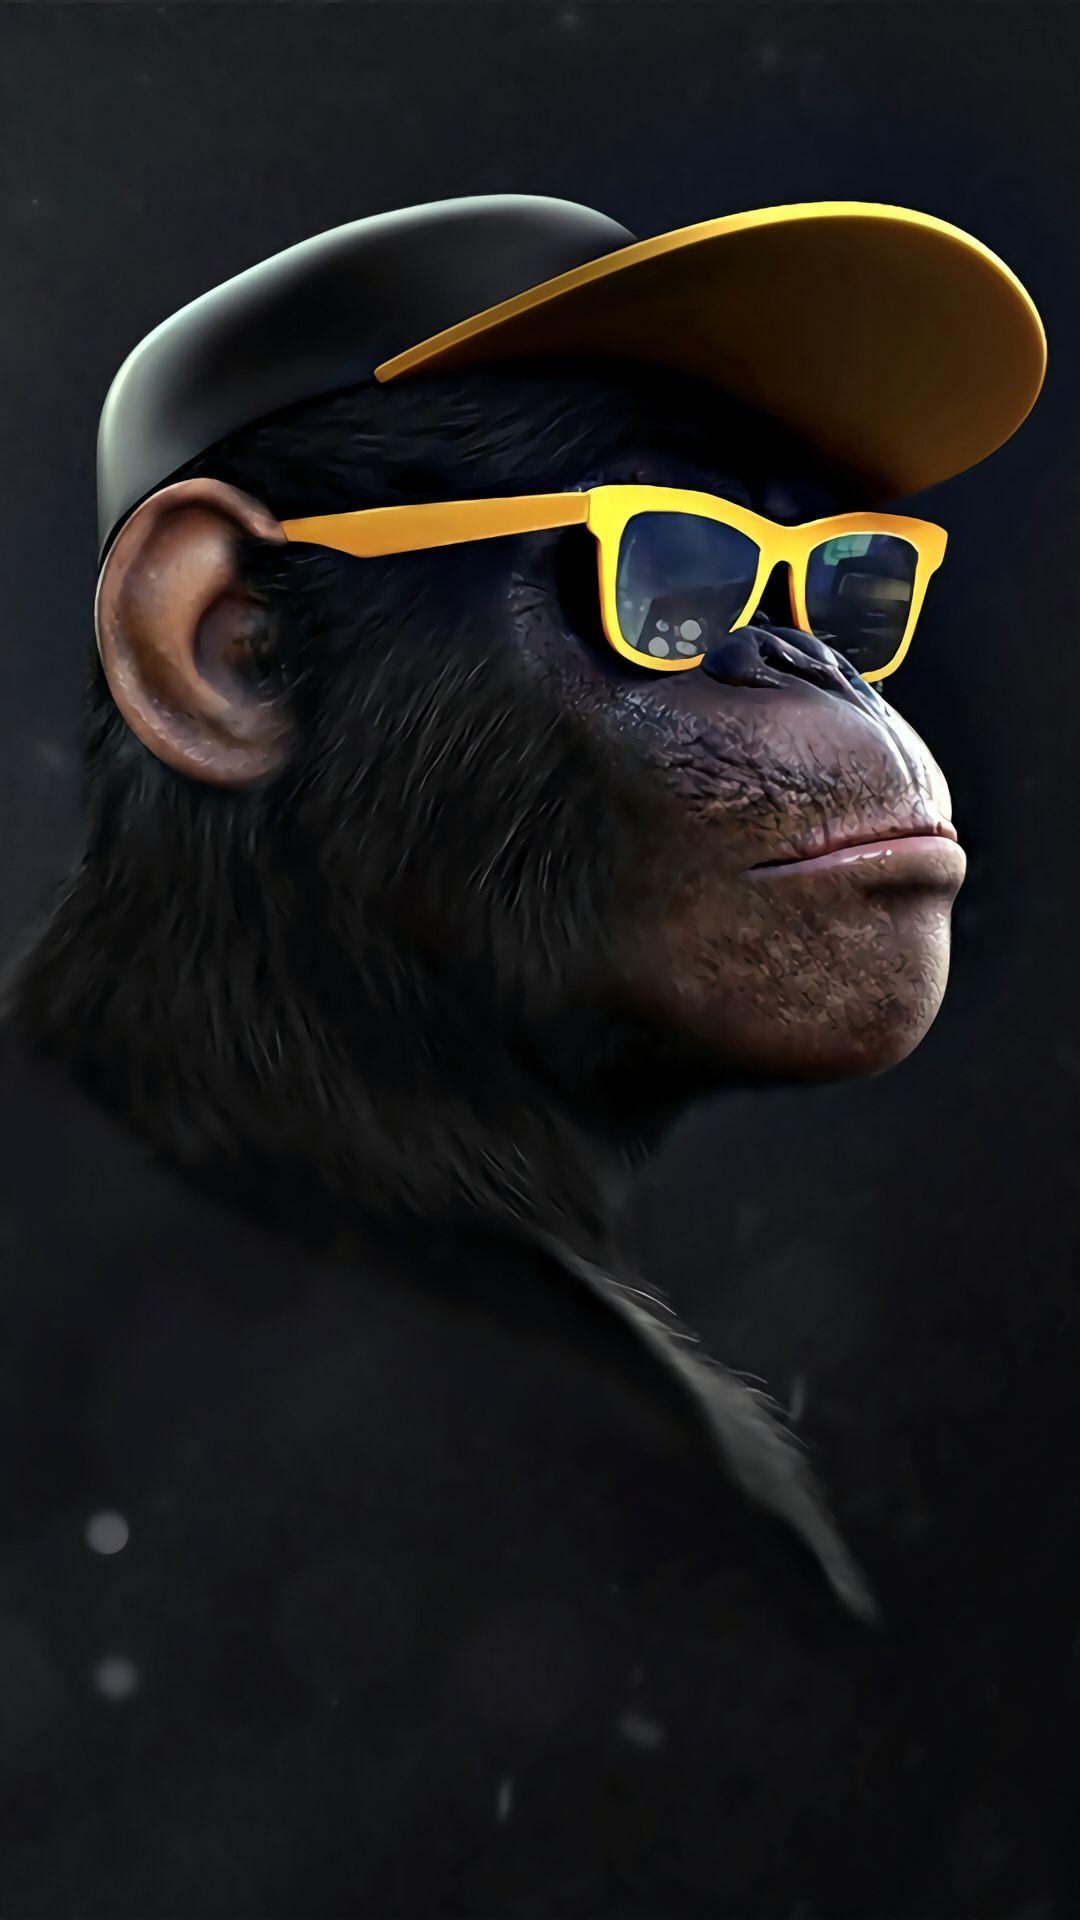 Monkey Swag Wallpapers Top Free Monkey Swag Backgrounds Wallpaperaccess